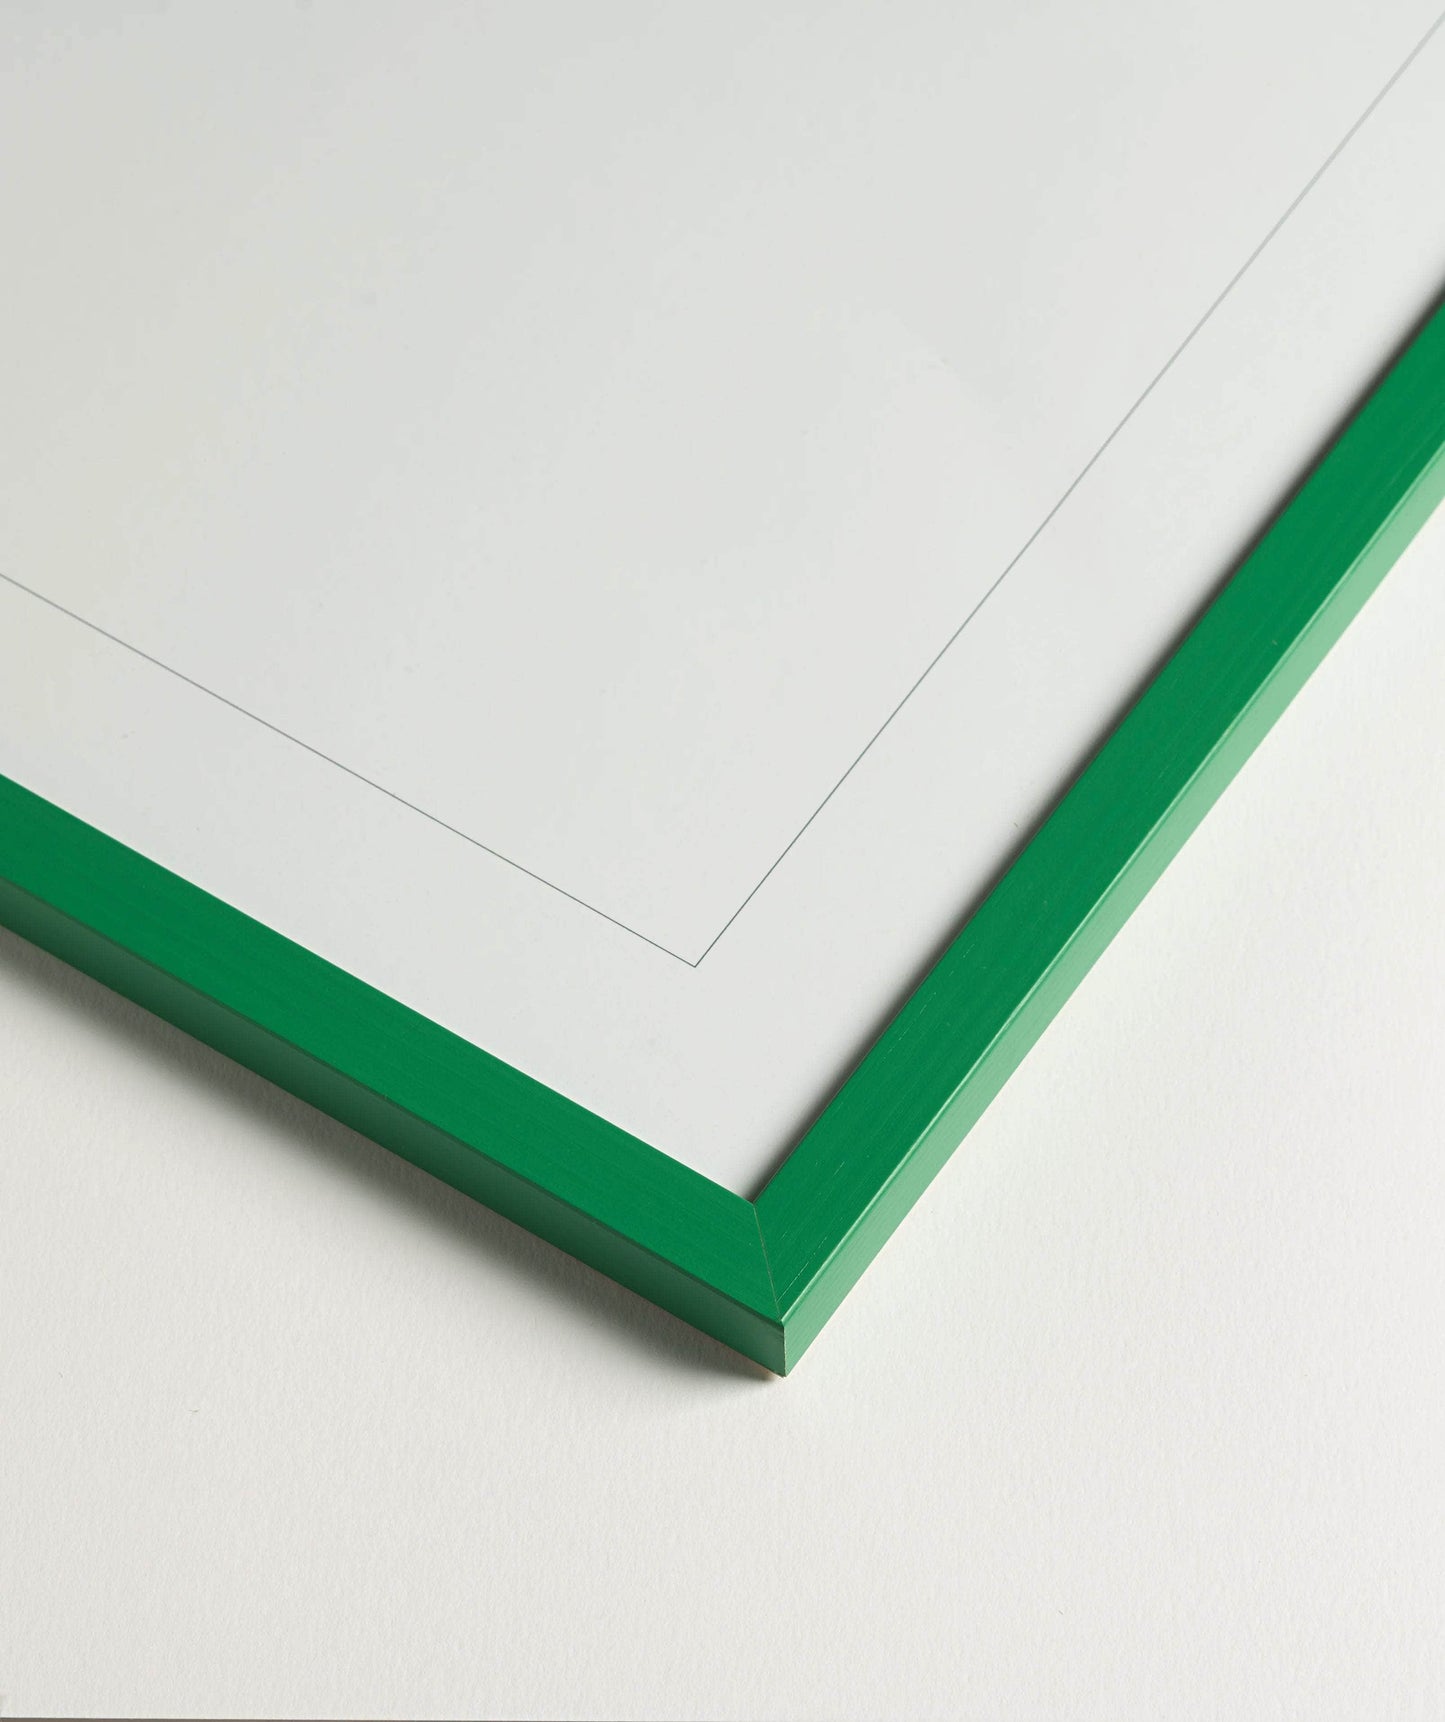 Emerald Green Solid Wood Frame